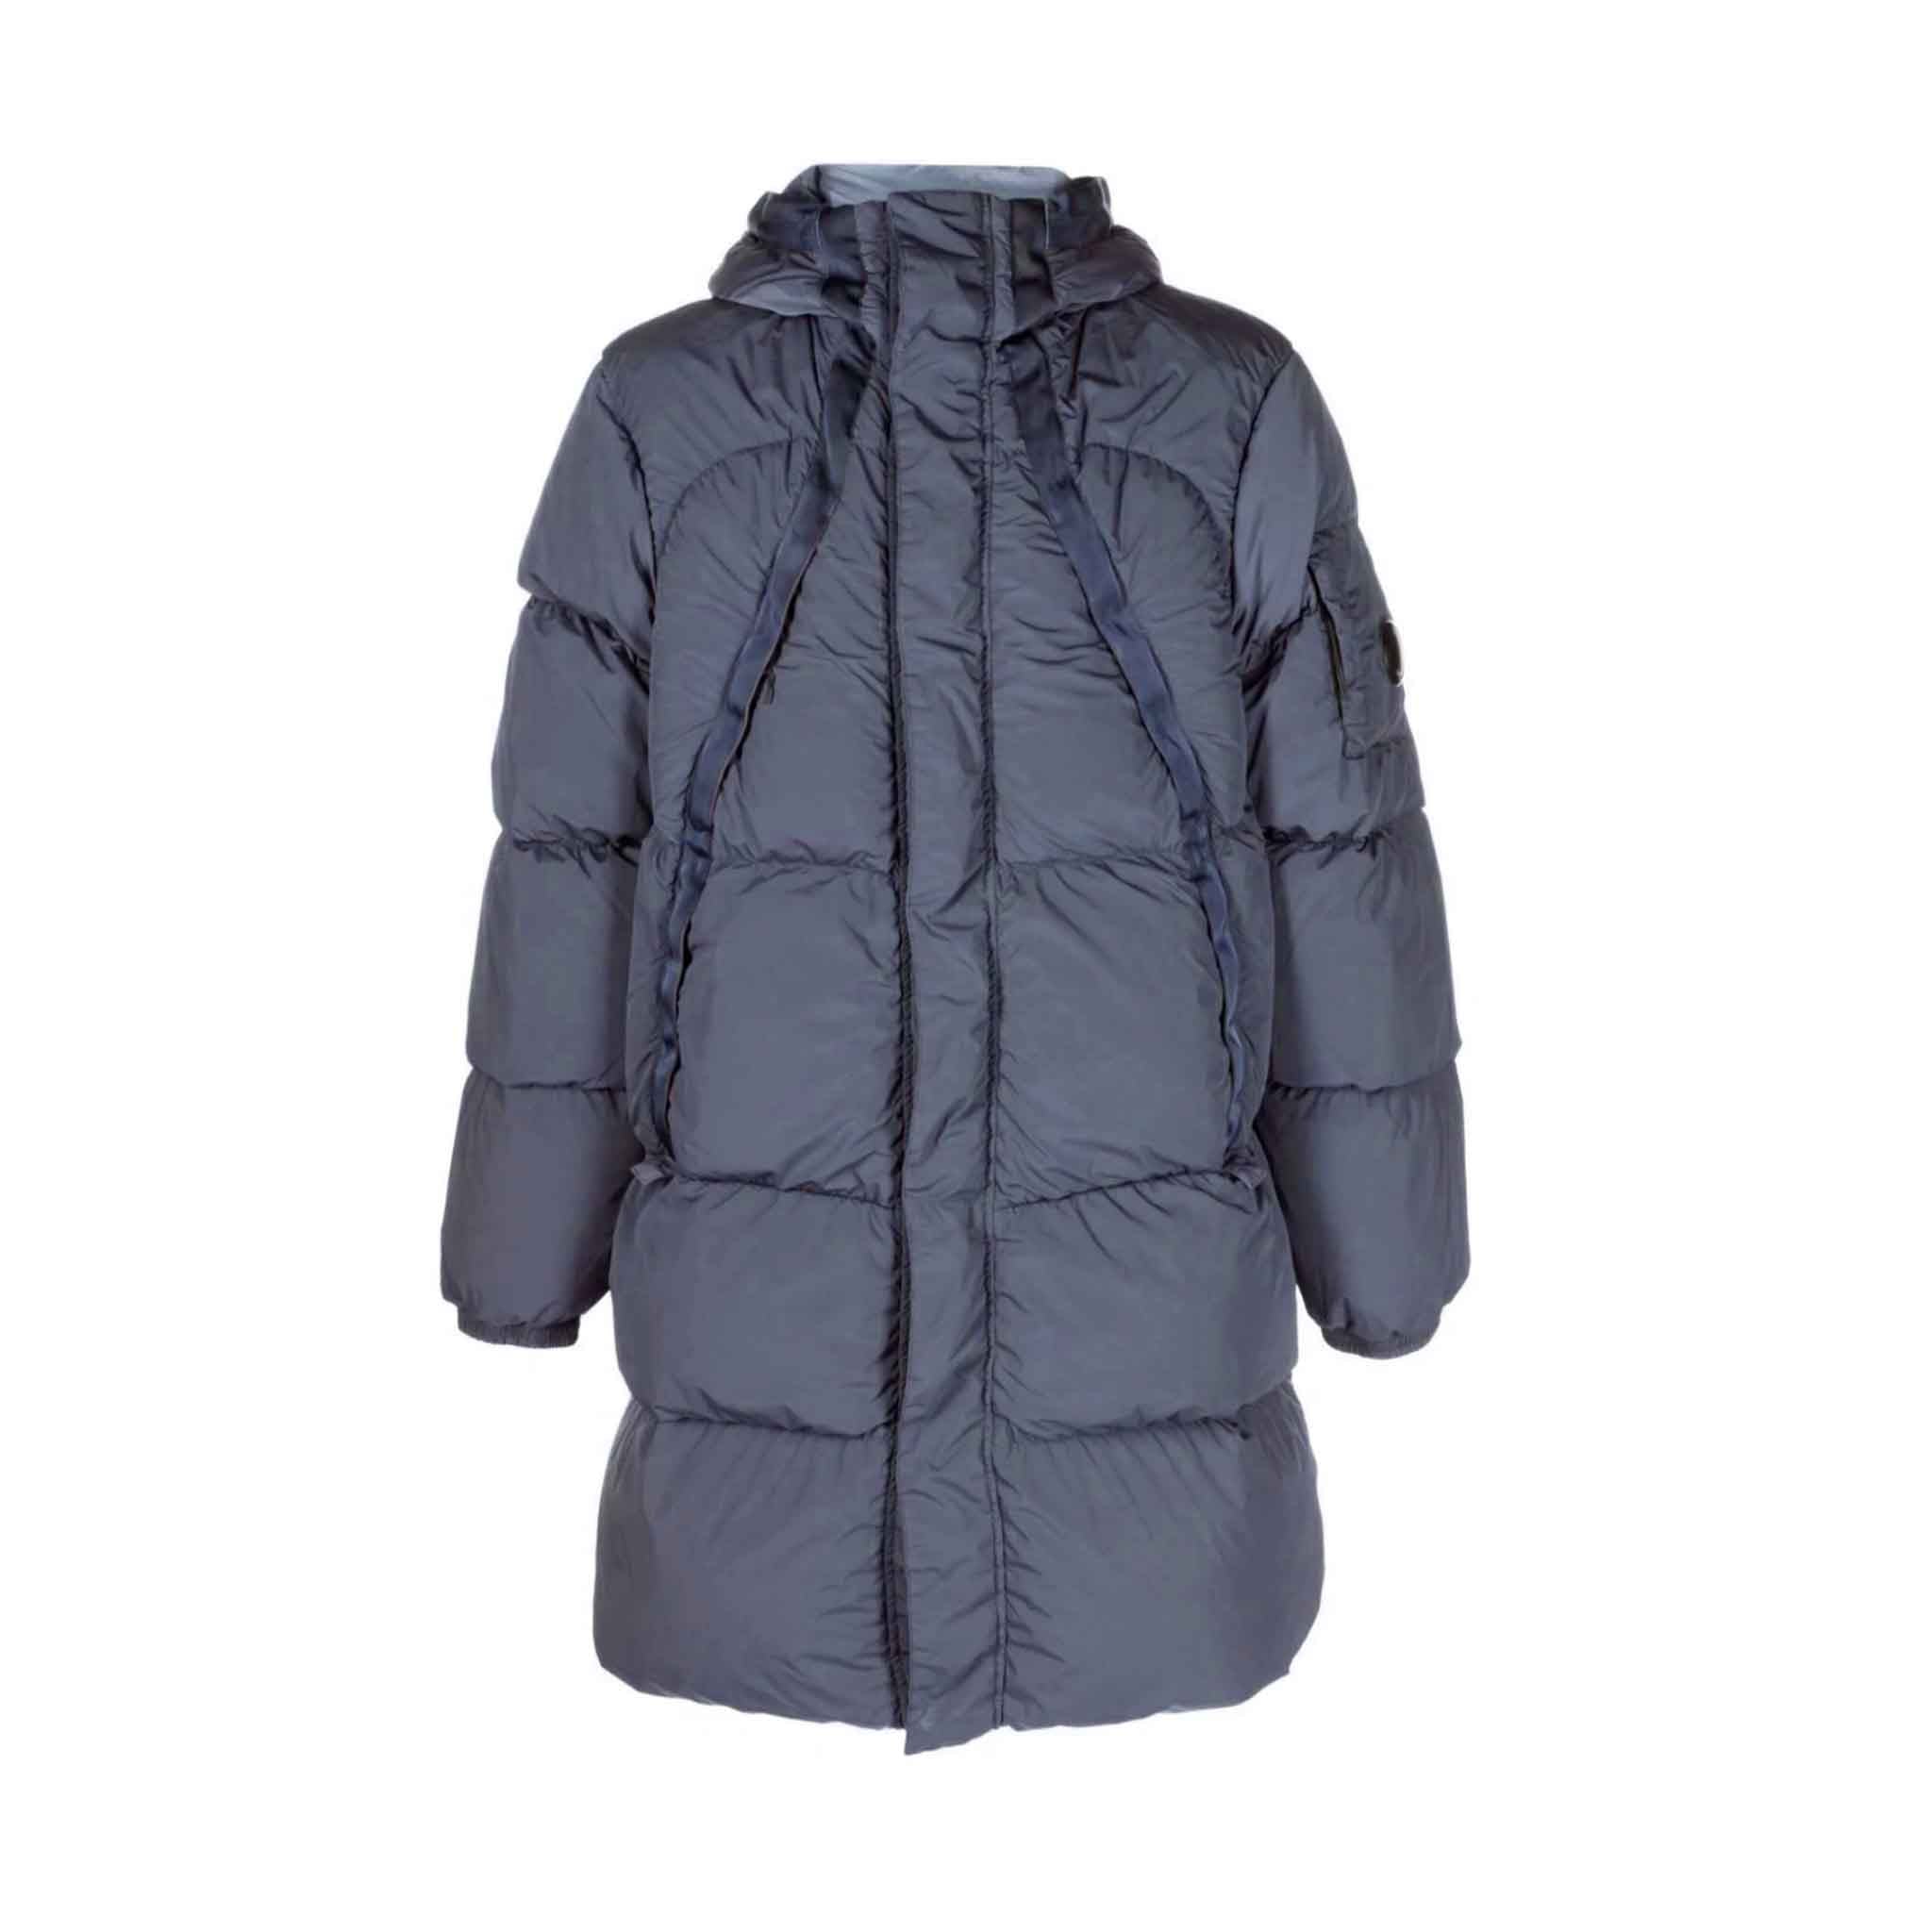 C.P. Company Nycra-R Hooded Down Jacket in Orion Blue